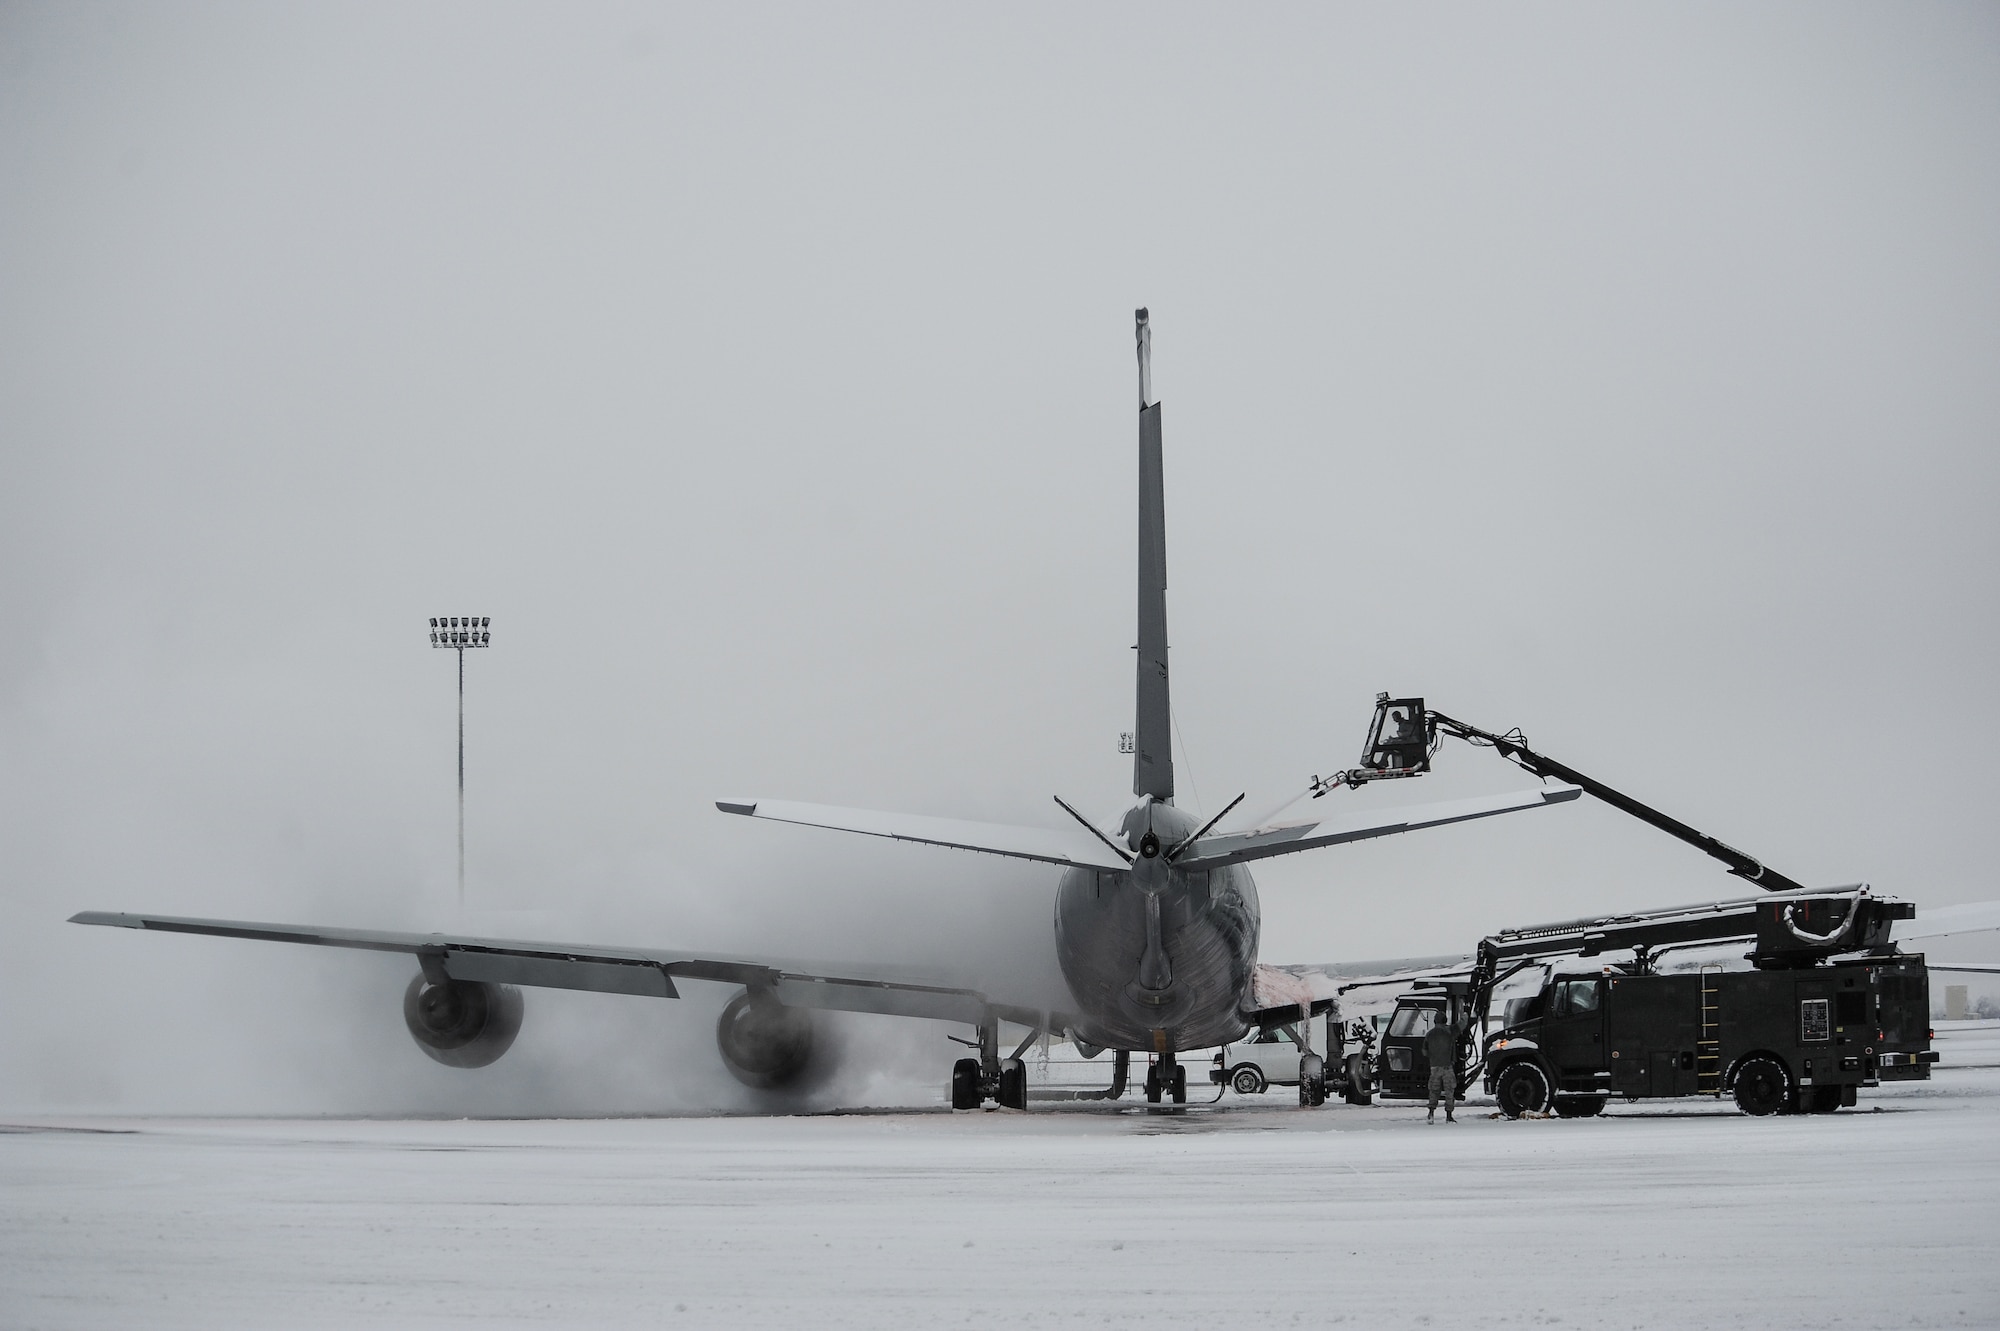 Airmen from the 92nd Aircraft Maintenance Squadron work together to deice a KC-135 Stratotanker Jan. 29, 2014, at Fairchild Air Force Base, Wash. Aircraft deicing is a process in which liquid solutions are sprayed onto an aircraft during the winter to both defrost and prevent future precipitation from freezing. Snow and ice on the wings and rear tail component change their shape and disrupt the airflow making it difficult to fly and diminishes fuel economy. (U.S. Air Force photo/Staff Sgt. Alexandre Montes)